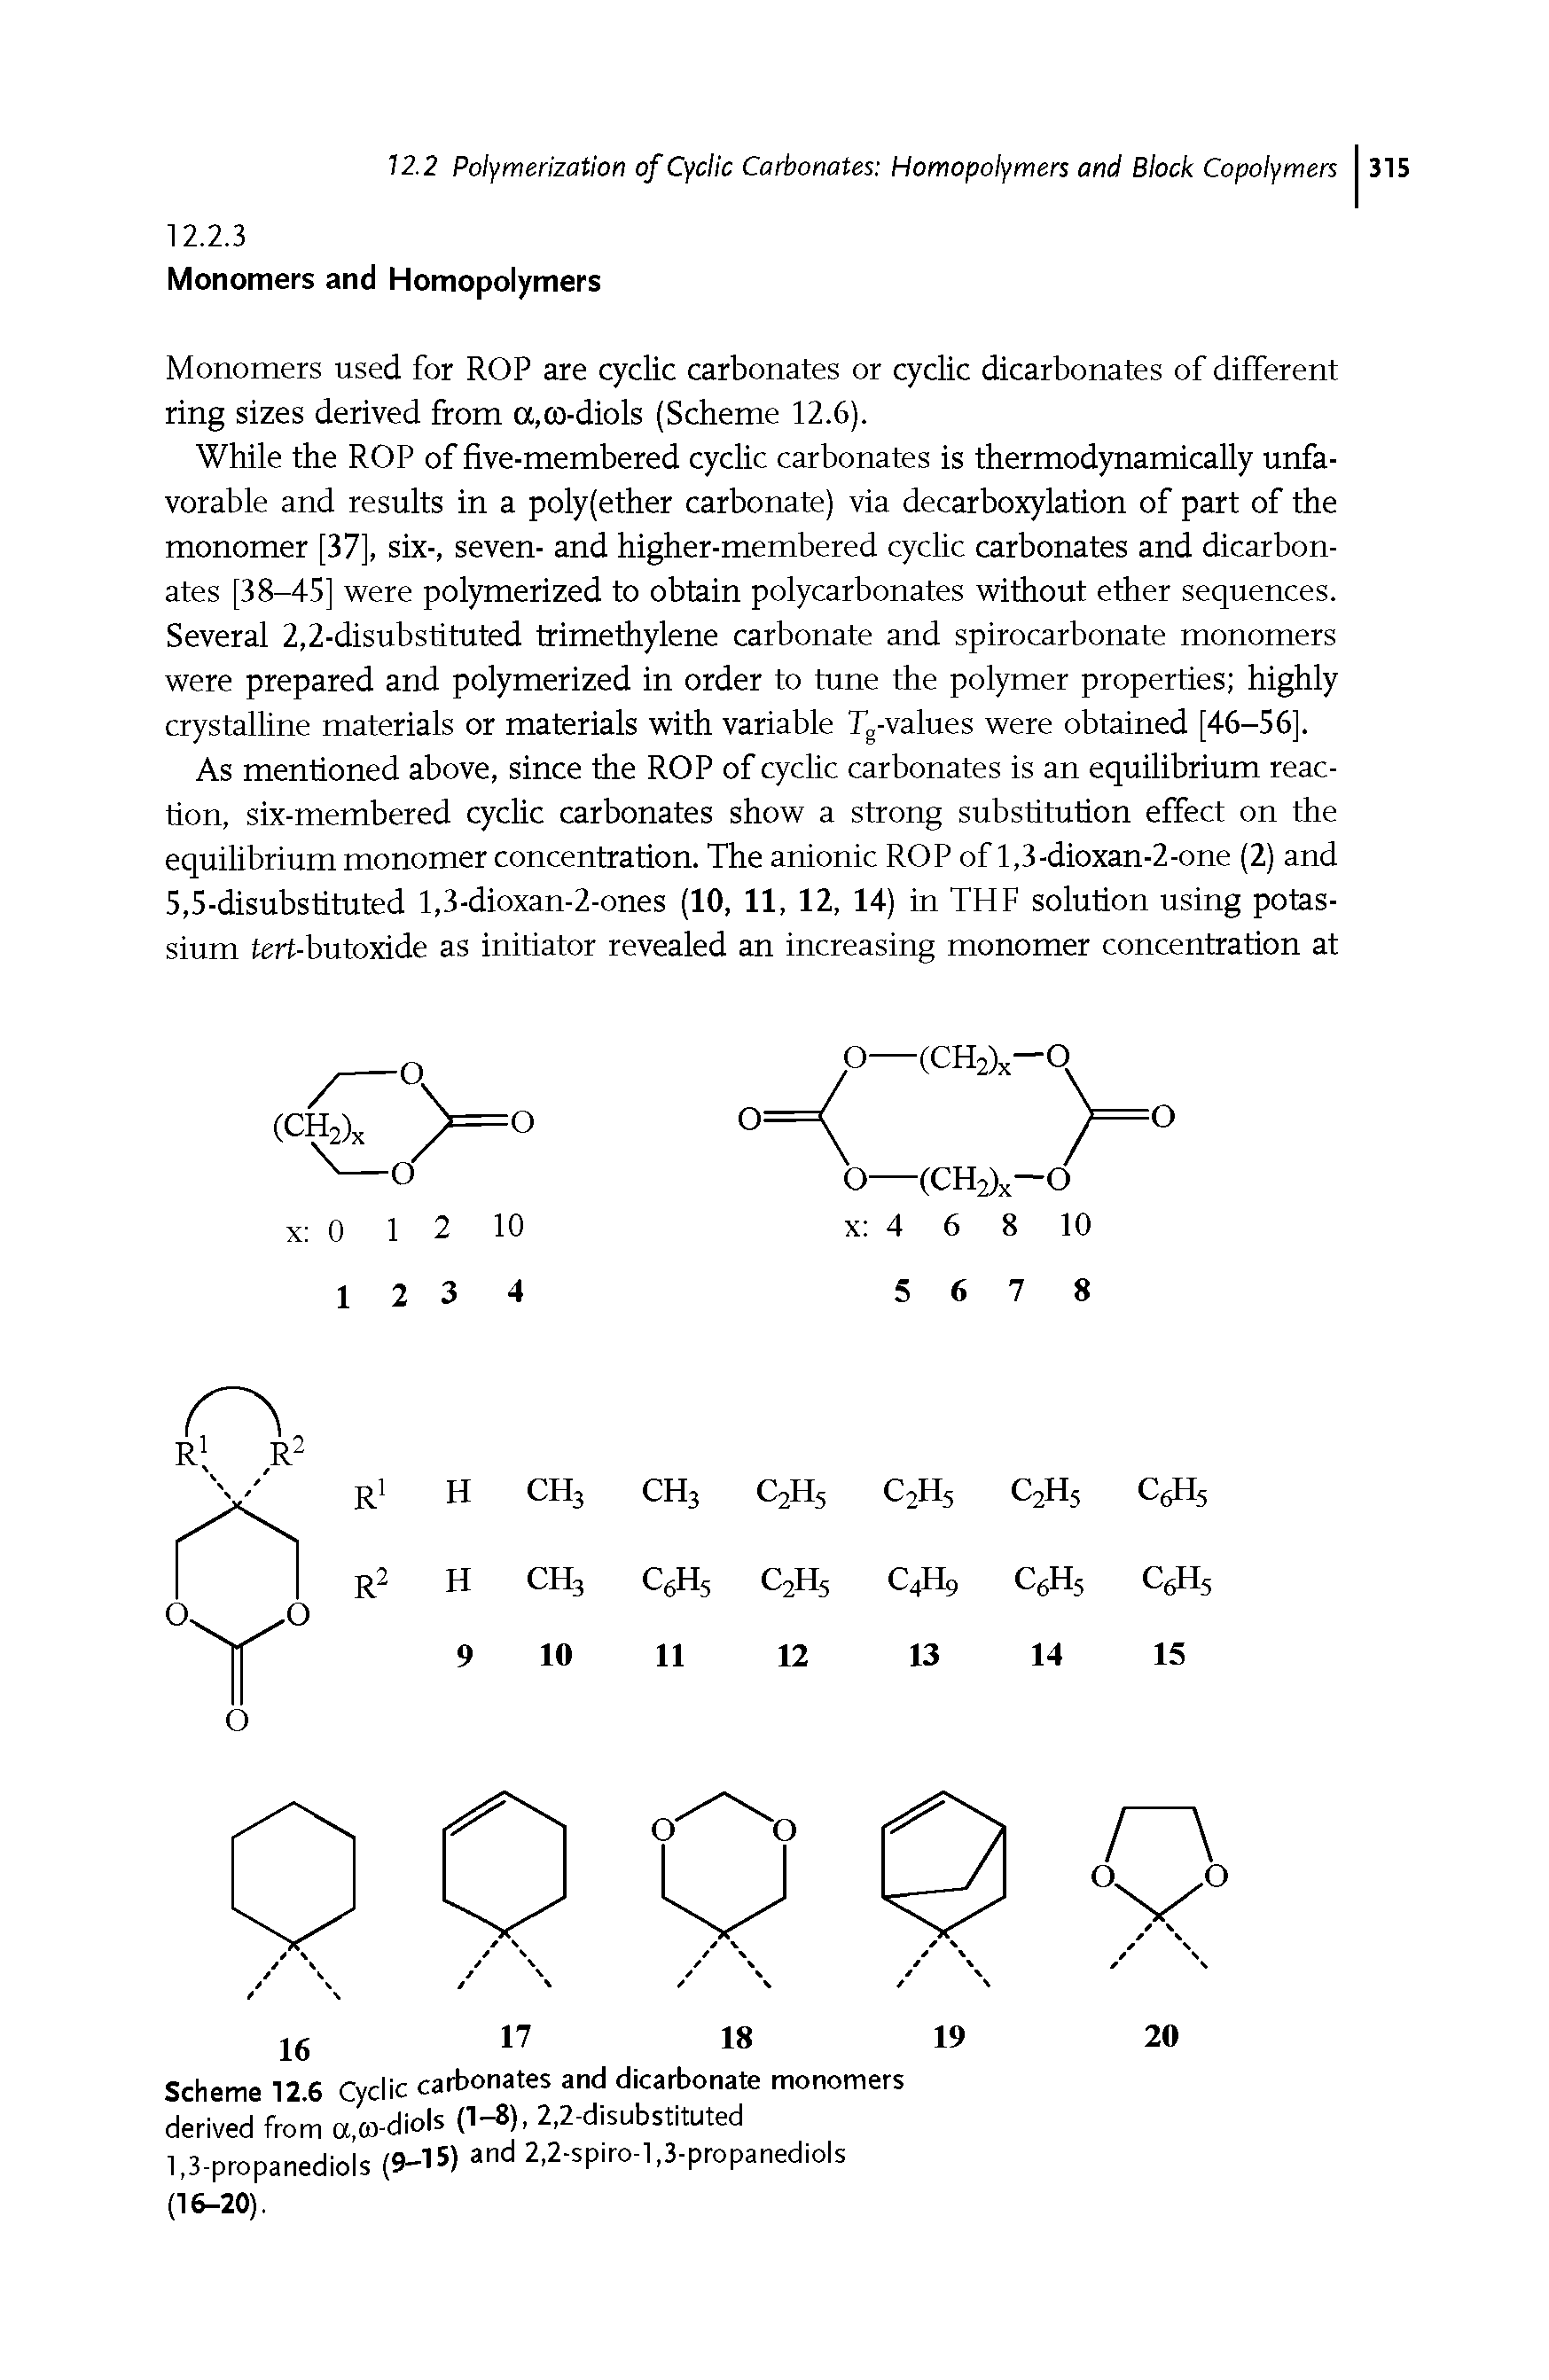 Scheme 12.6 Cyclic carbonates and dicarbonate monomers derived from a,(o-diols (1—8), 2,2-disubstituted 1,3-propanediols (9-15) and 2,2-spiro-l,3-propanediols (16-20).